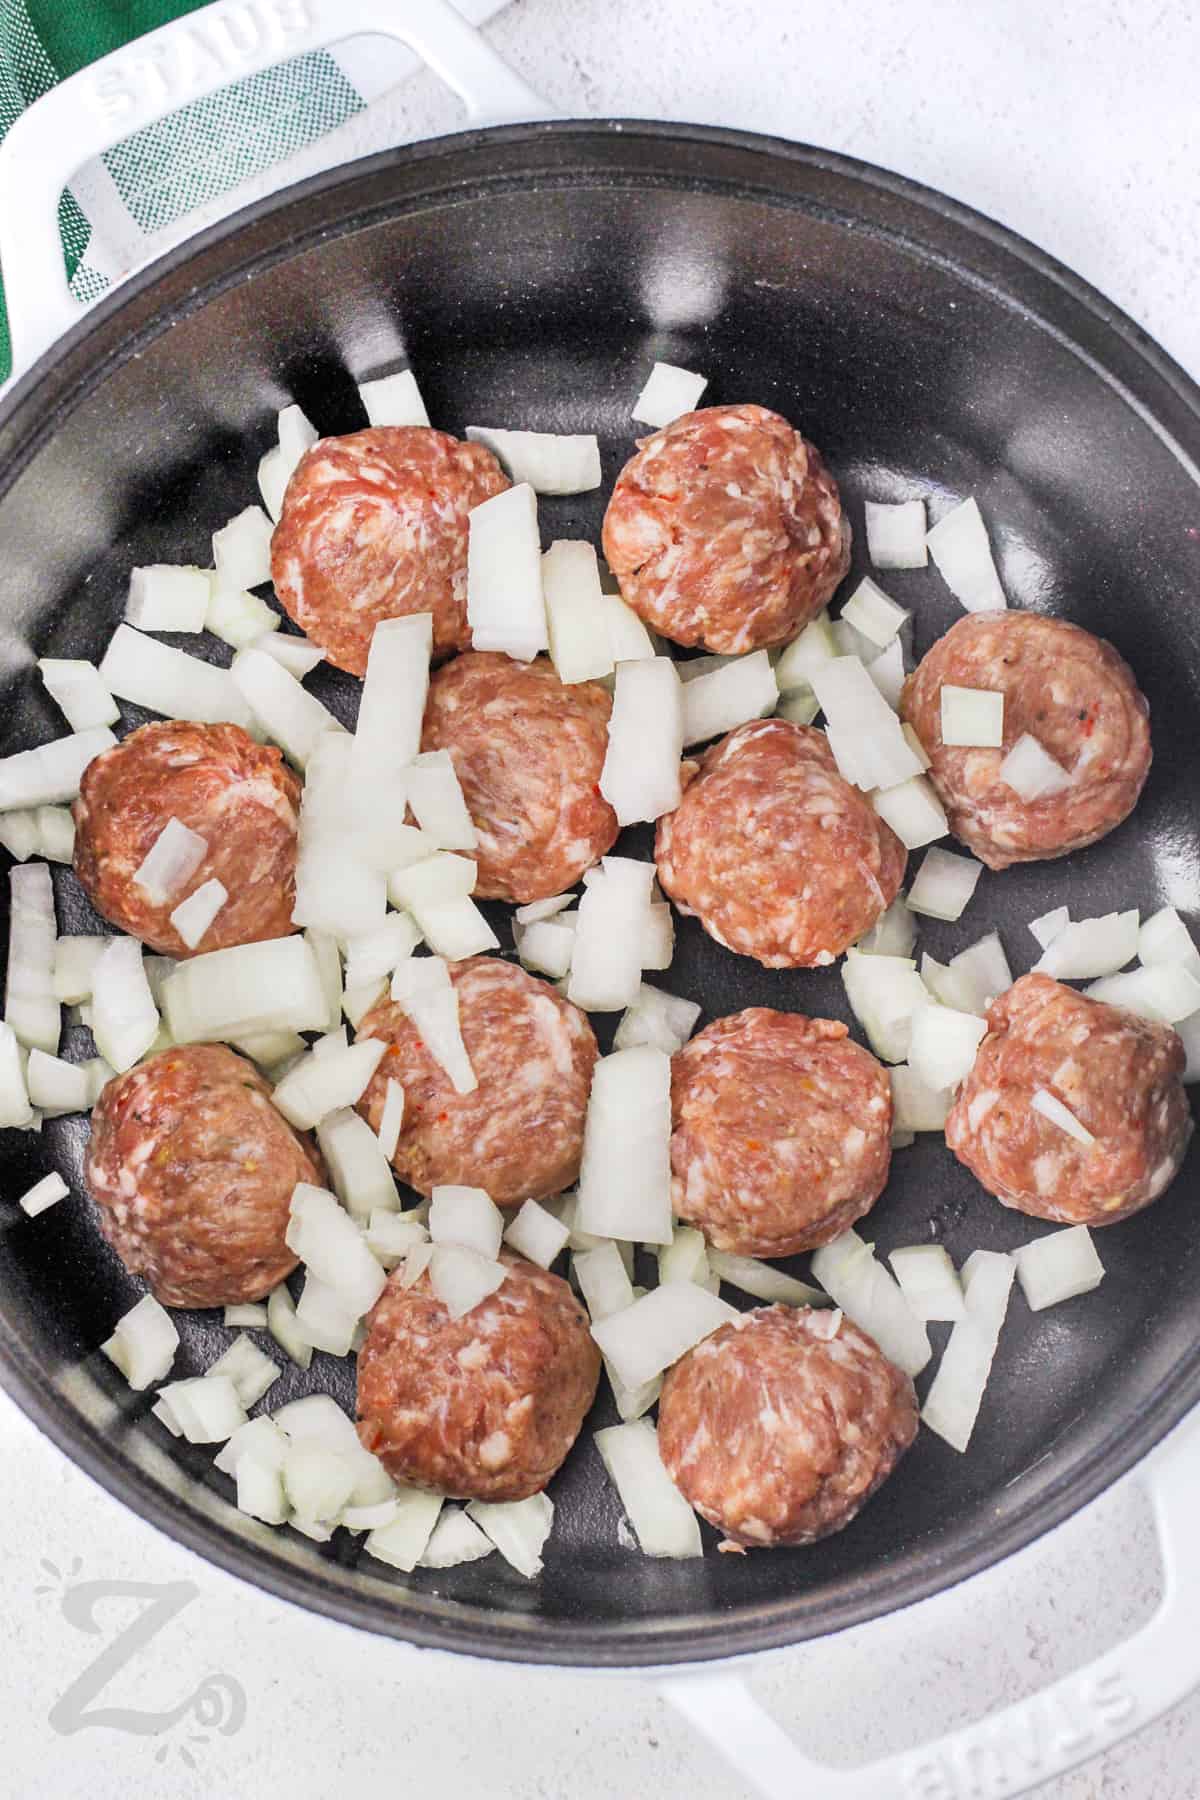 uncooked meatballs and onions in a frying pan